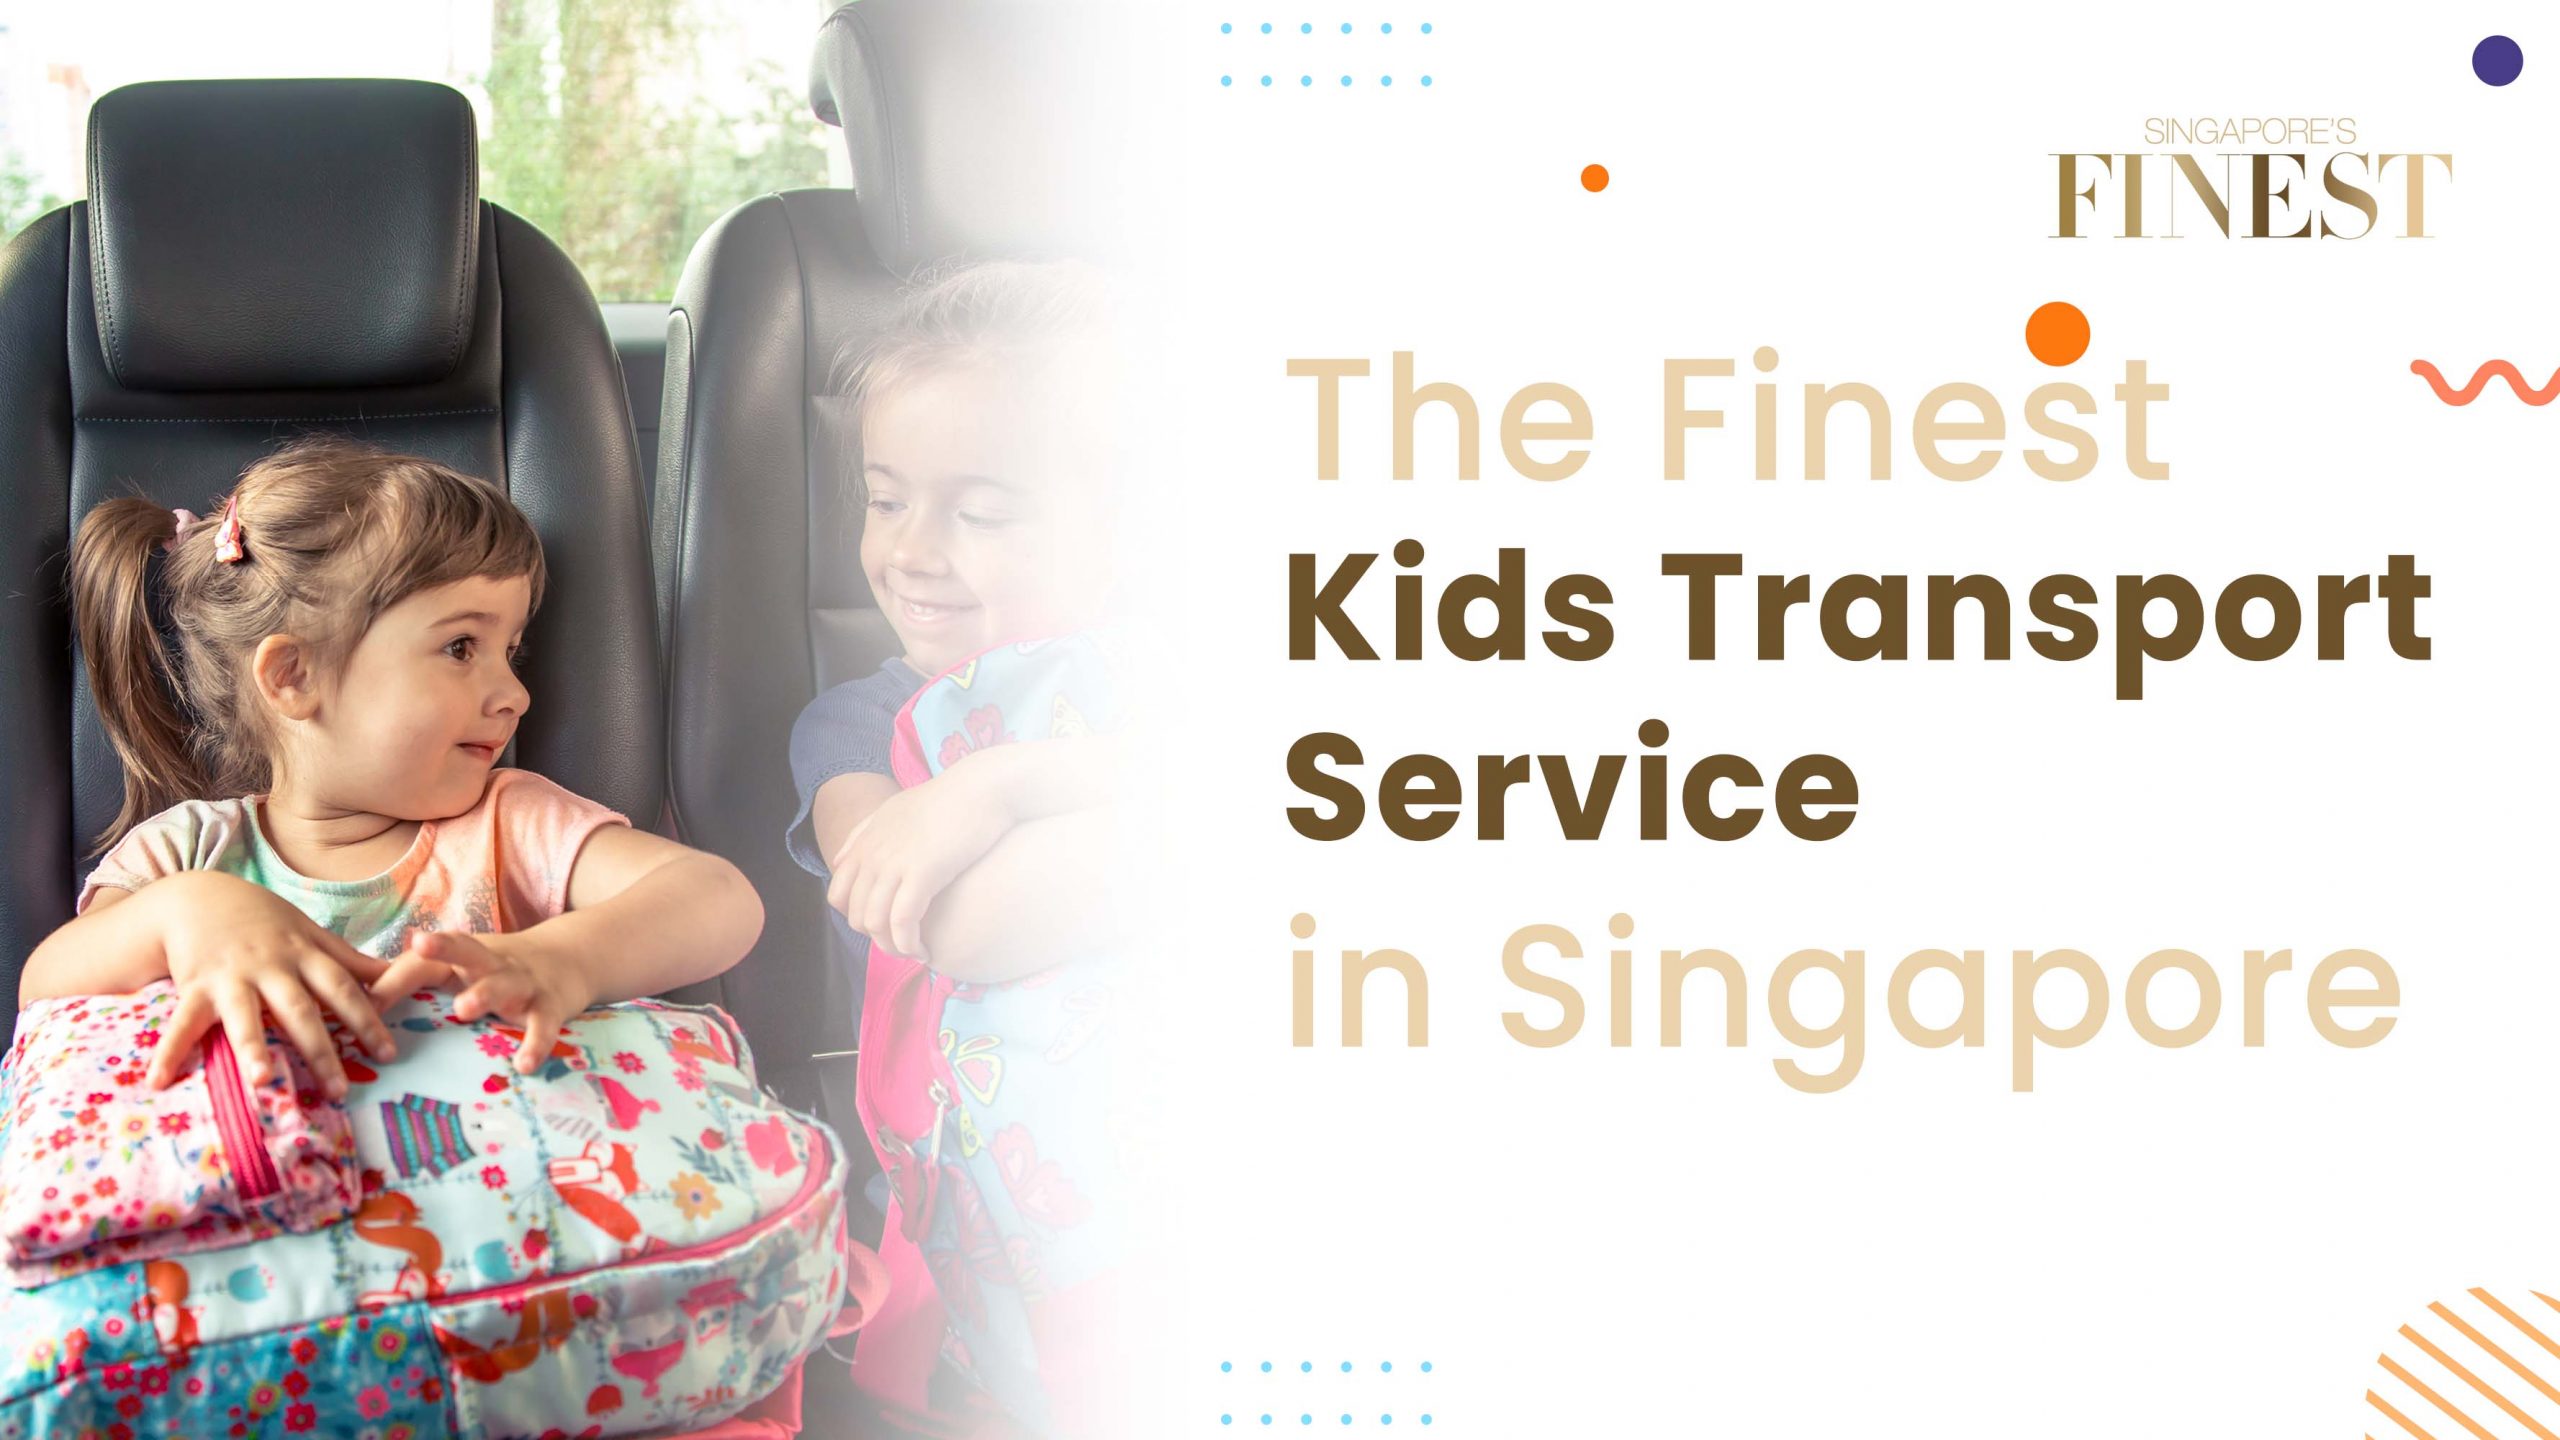 The Finest Transport Service for Kids in Singapore